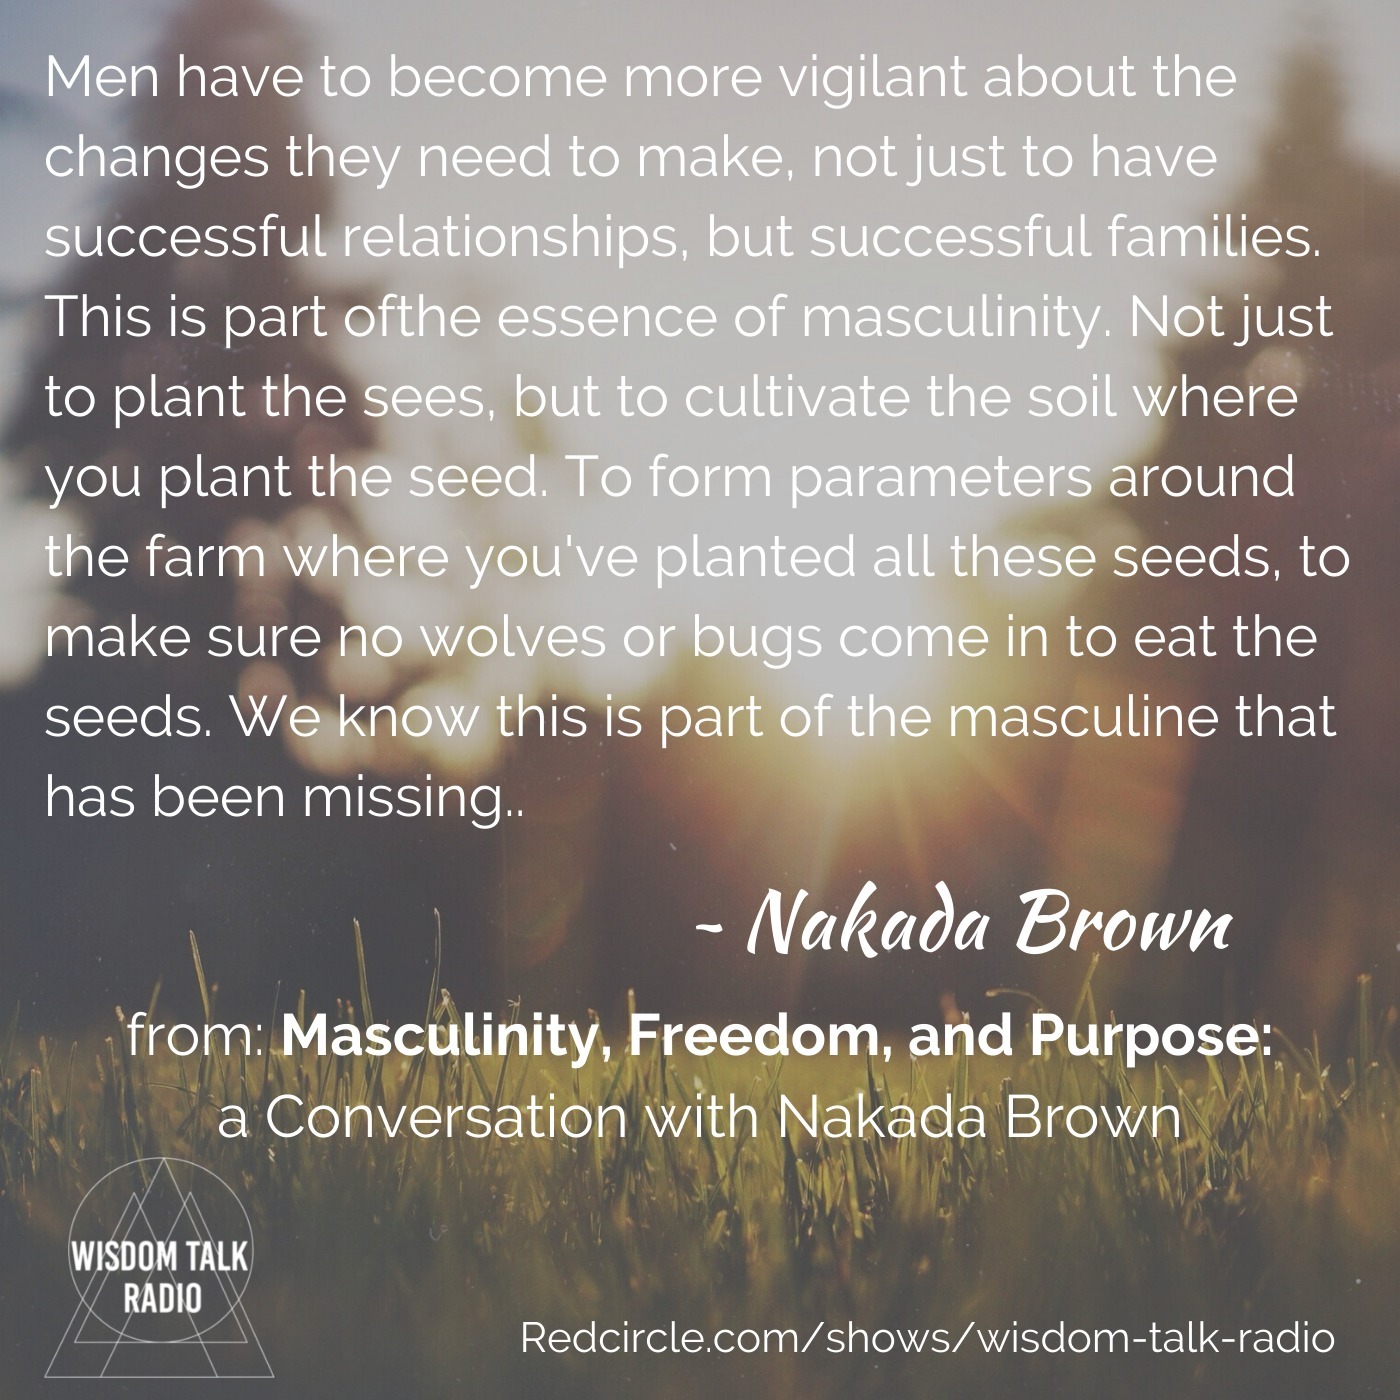 Masculinity, Freedom, and Purpose, a conversation with Nakada Brown